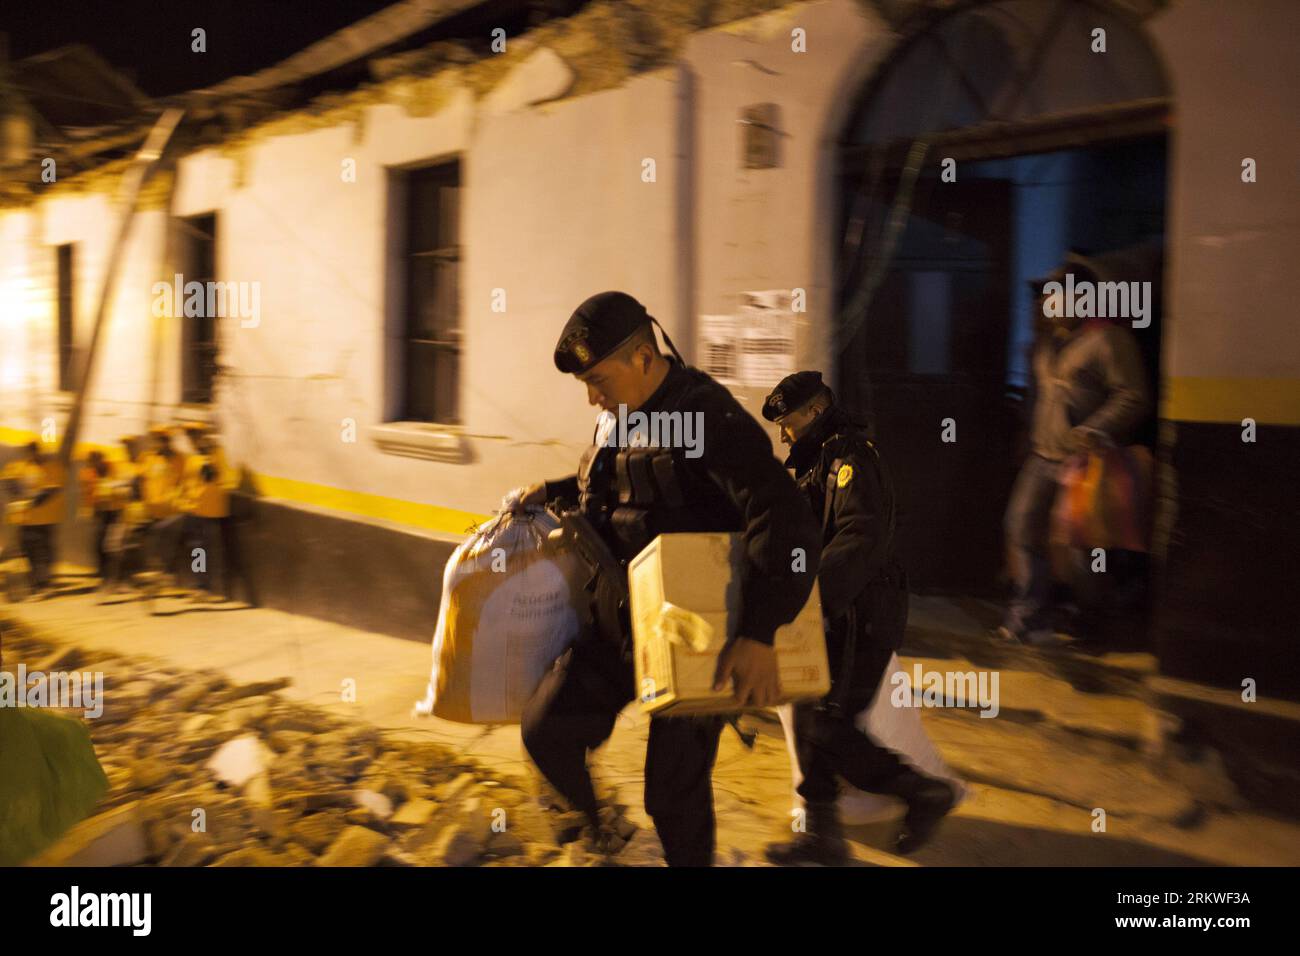 Bildnummer: 58676840  Datum: 07.11.2012  Copyright: imago/Xinhua SAN MARCOS, (Xinhua) -- Police agents evacuate a Police Station due to structural damage after an earthquake, in San Marcos, Guatemala, on Nov. 7, 2012. A 7.4 degree on the Richter scale earthquake affected Guatemala on Wednesday, the epicenter was located at sea, 24 km south of Champerico port municipalty, Guatemala, according to United States Geologic Service (USGS) data. (Xinhua/Luis Echeverr¨ªa) (le) (rh) (ce) GUATEMALA-SAN MARCOS-ENVIRONMENT-EARTHQUAKE PUBLICATIONxNOTxINxCHN Gesellschaft Erdbeben Aufräumarbeiten Natarkatastr Stock Photo